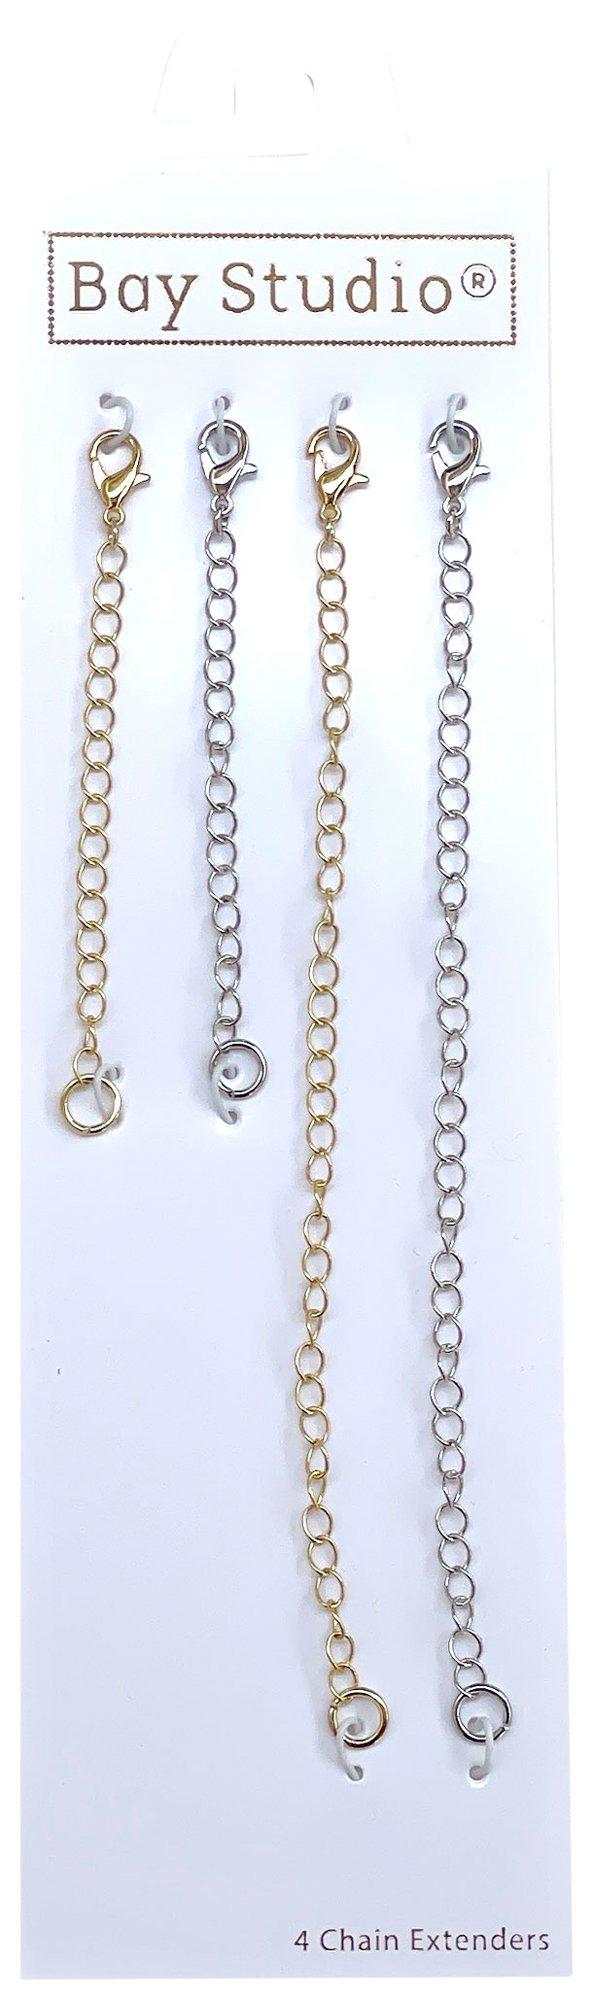 s 4-pc. Chain Extenders Gold Silver Tone